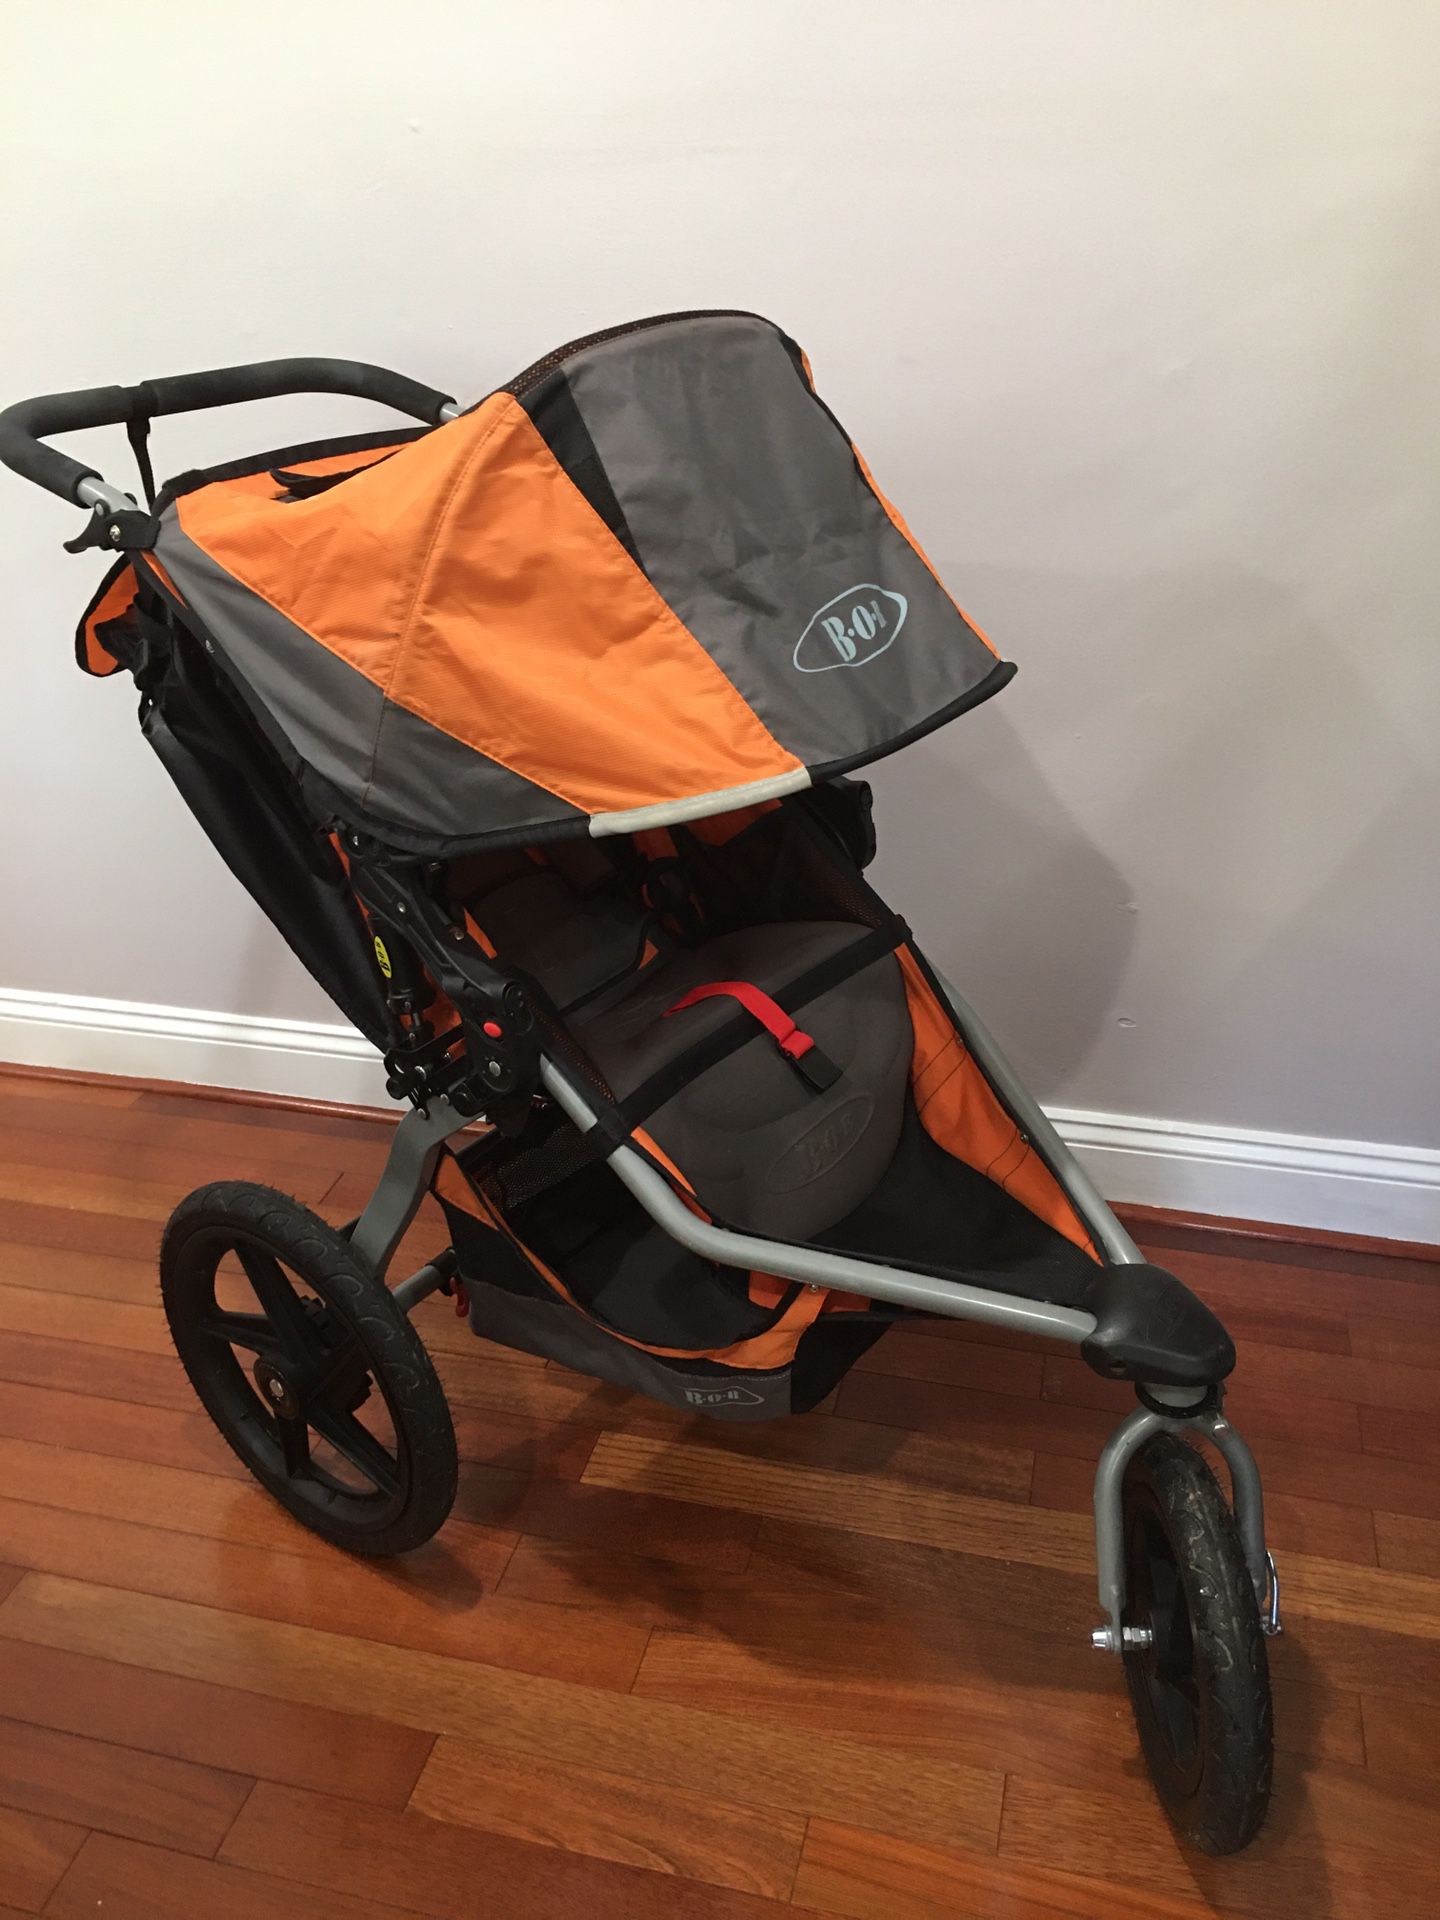 BOB collapsible jogging stroller. Easy to collapse and put away when not being used.